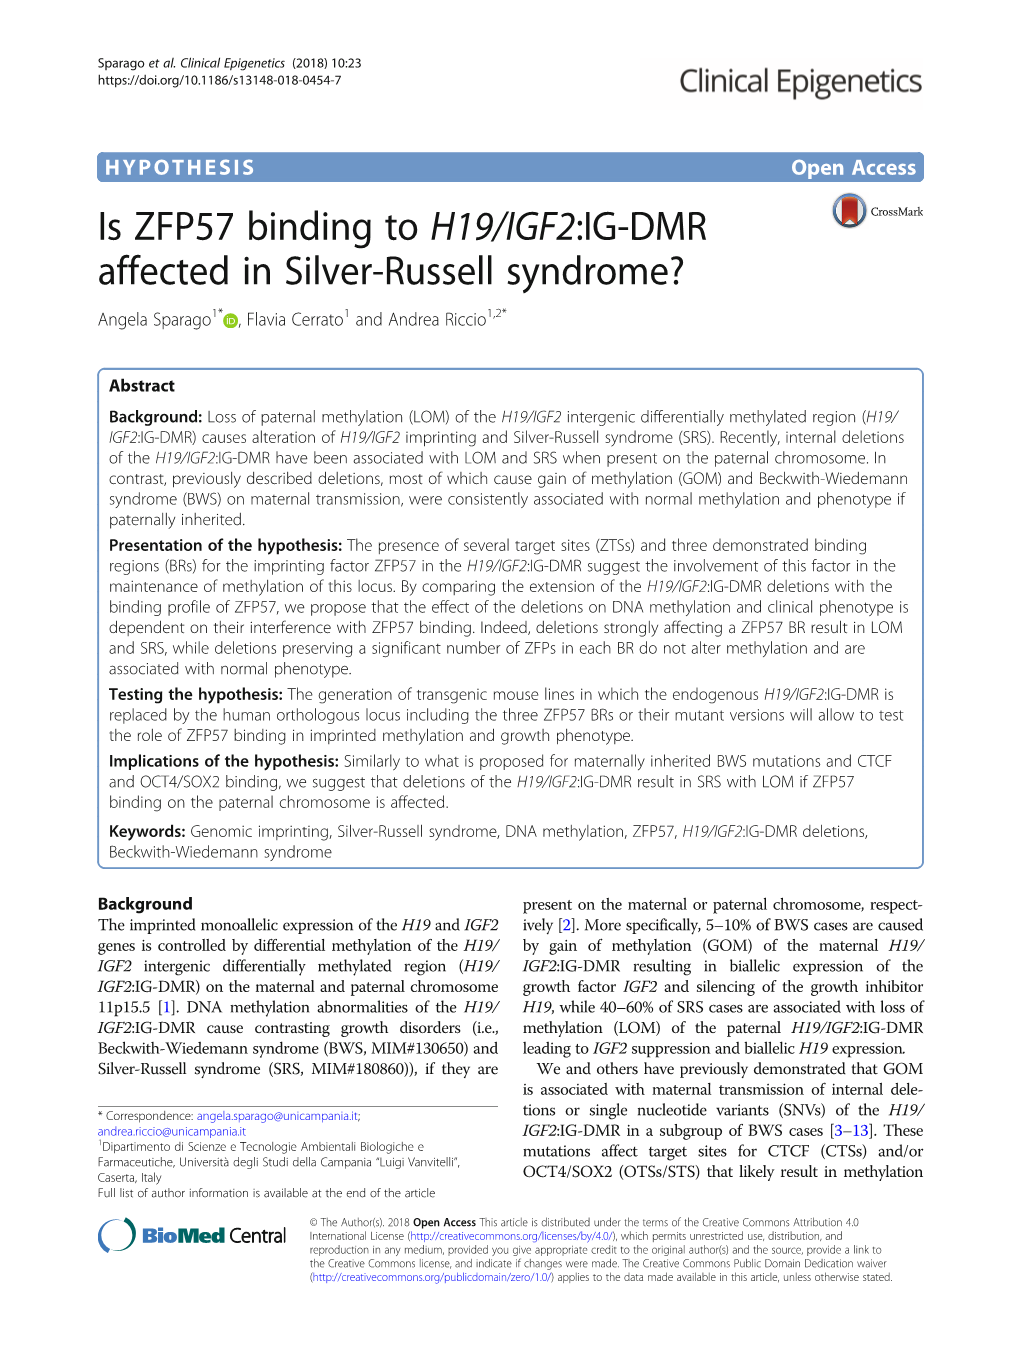 Is ZFP57 Binding to H19/IGF2:IG-DMR Affected in Silver-Russell Syndrome? Angela Sparago1* , Flavia Cerrato1 and Andrea Riccio1,2*